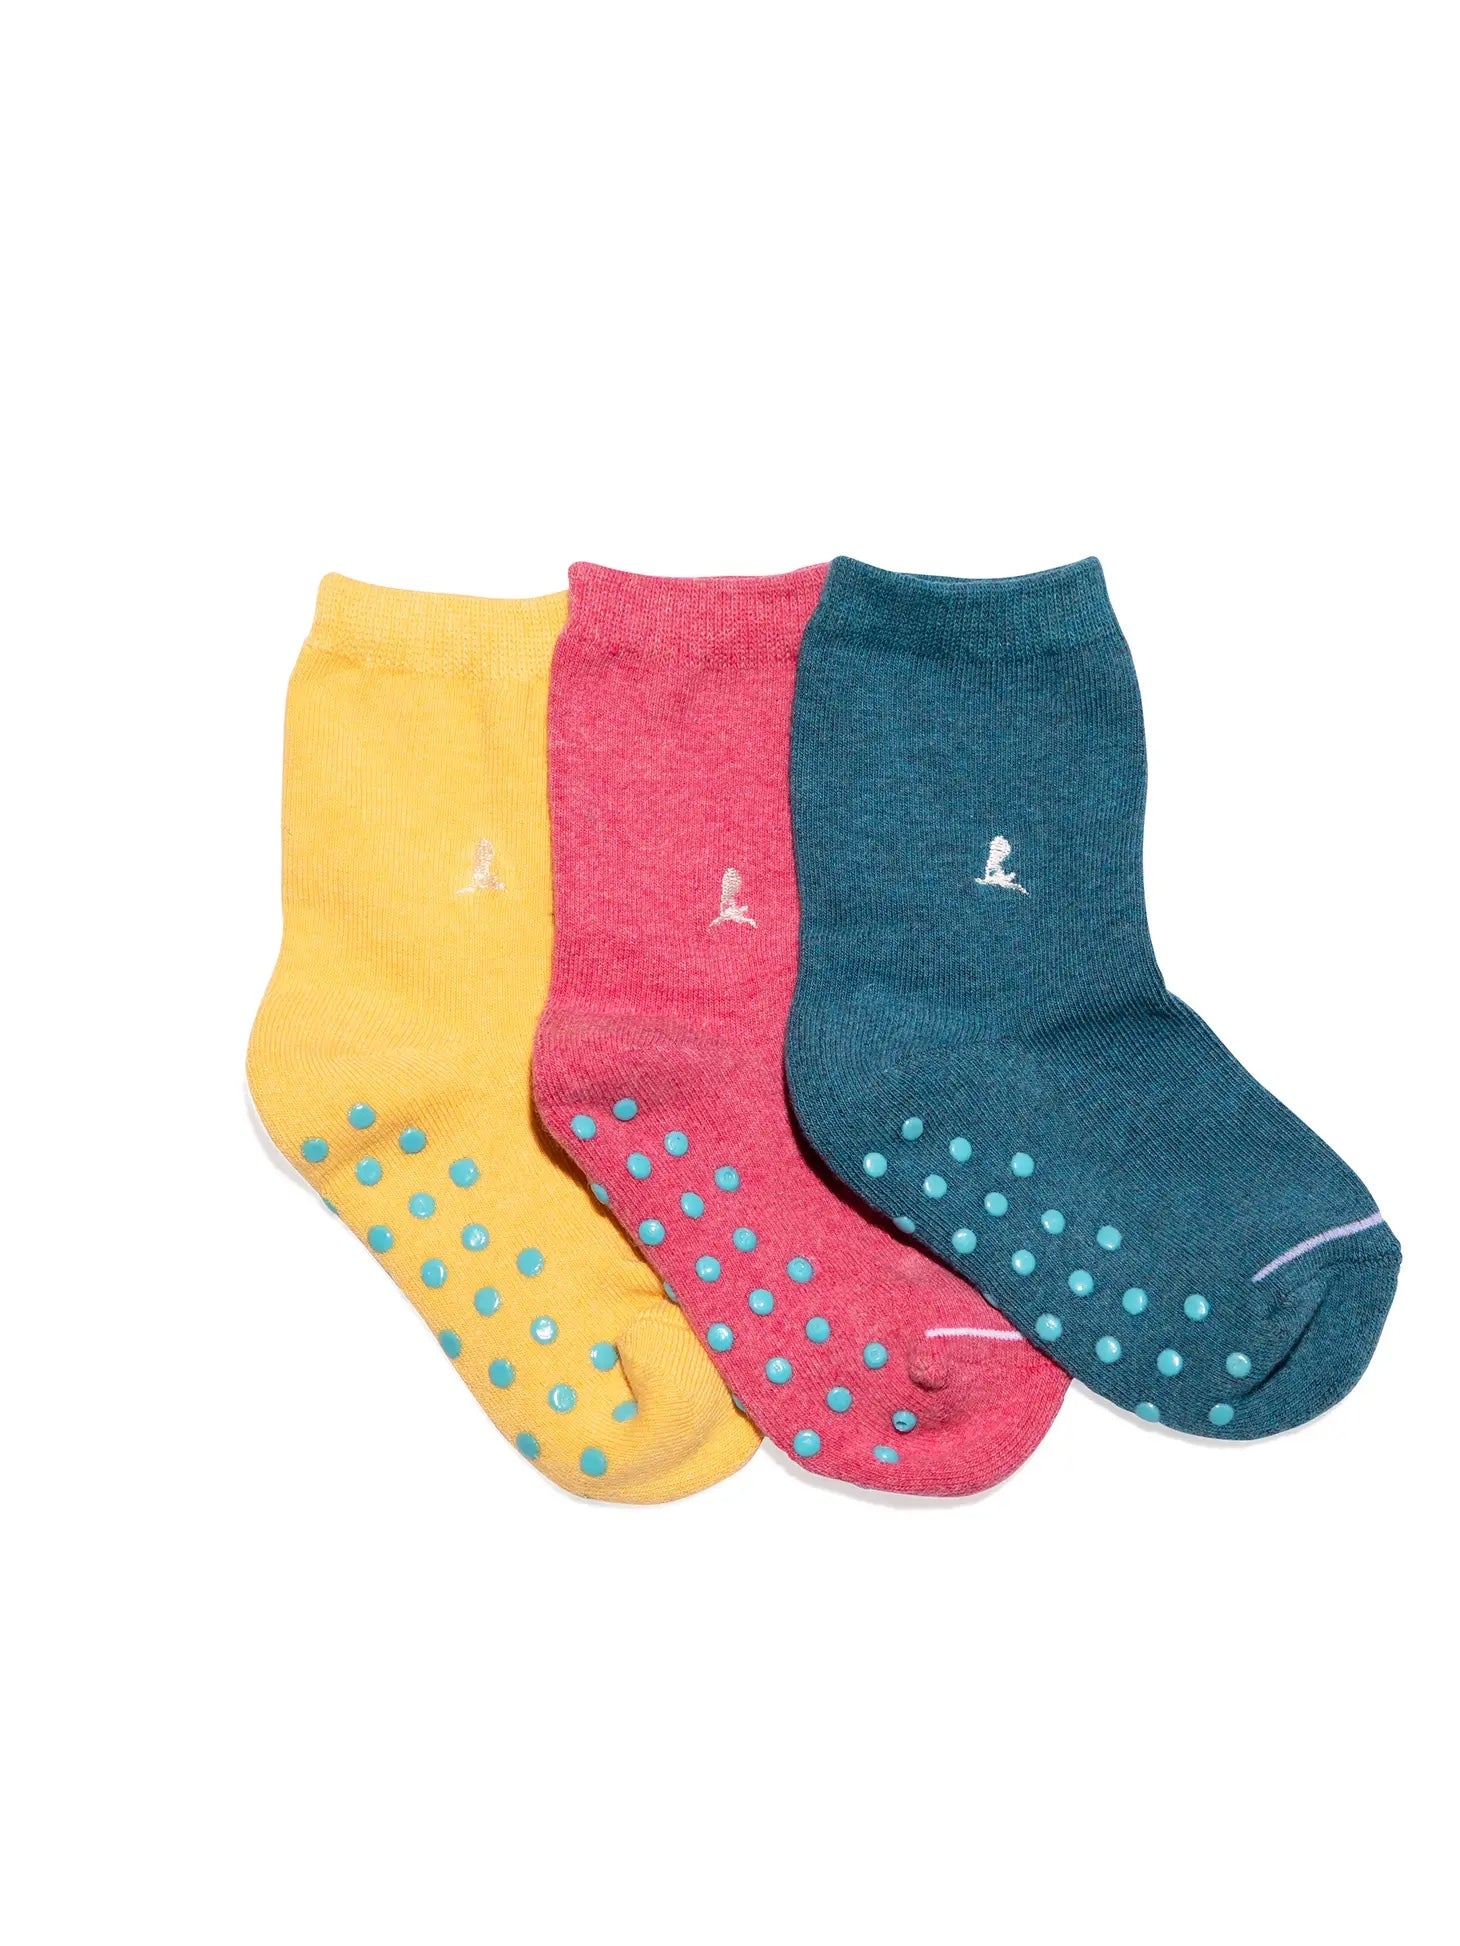 kids socks that find a cure toddler